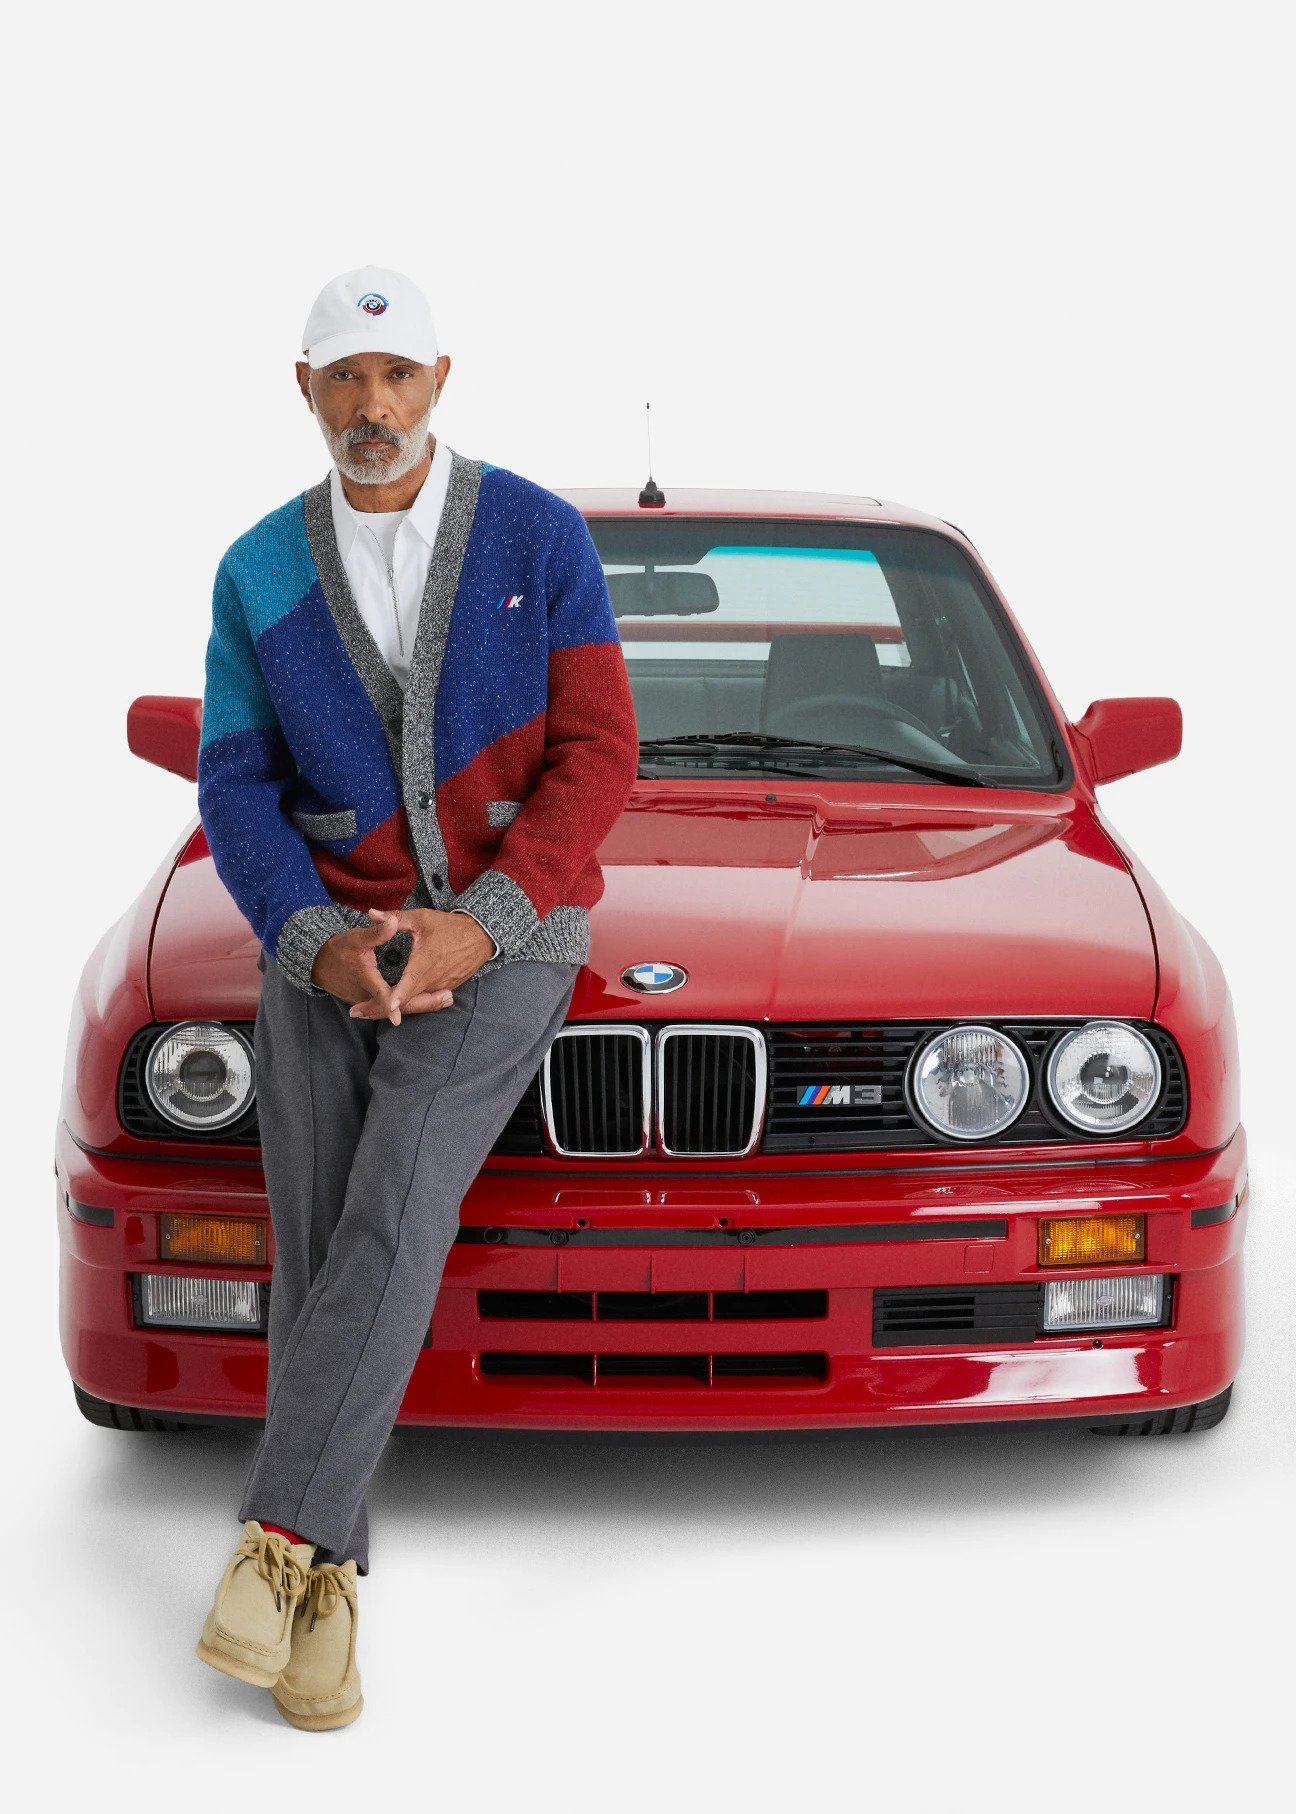 Official Look at the Kith for BMW Collection